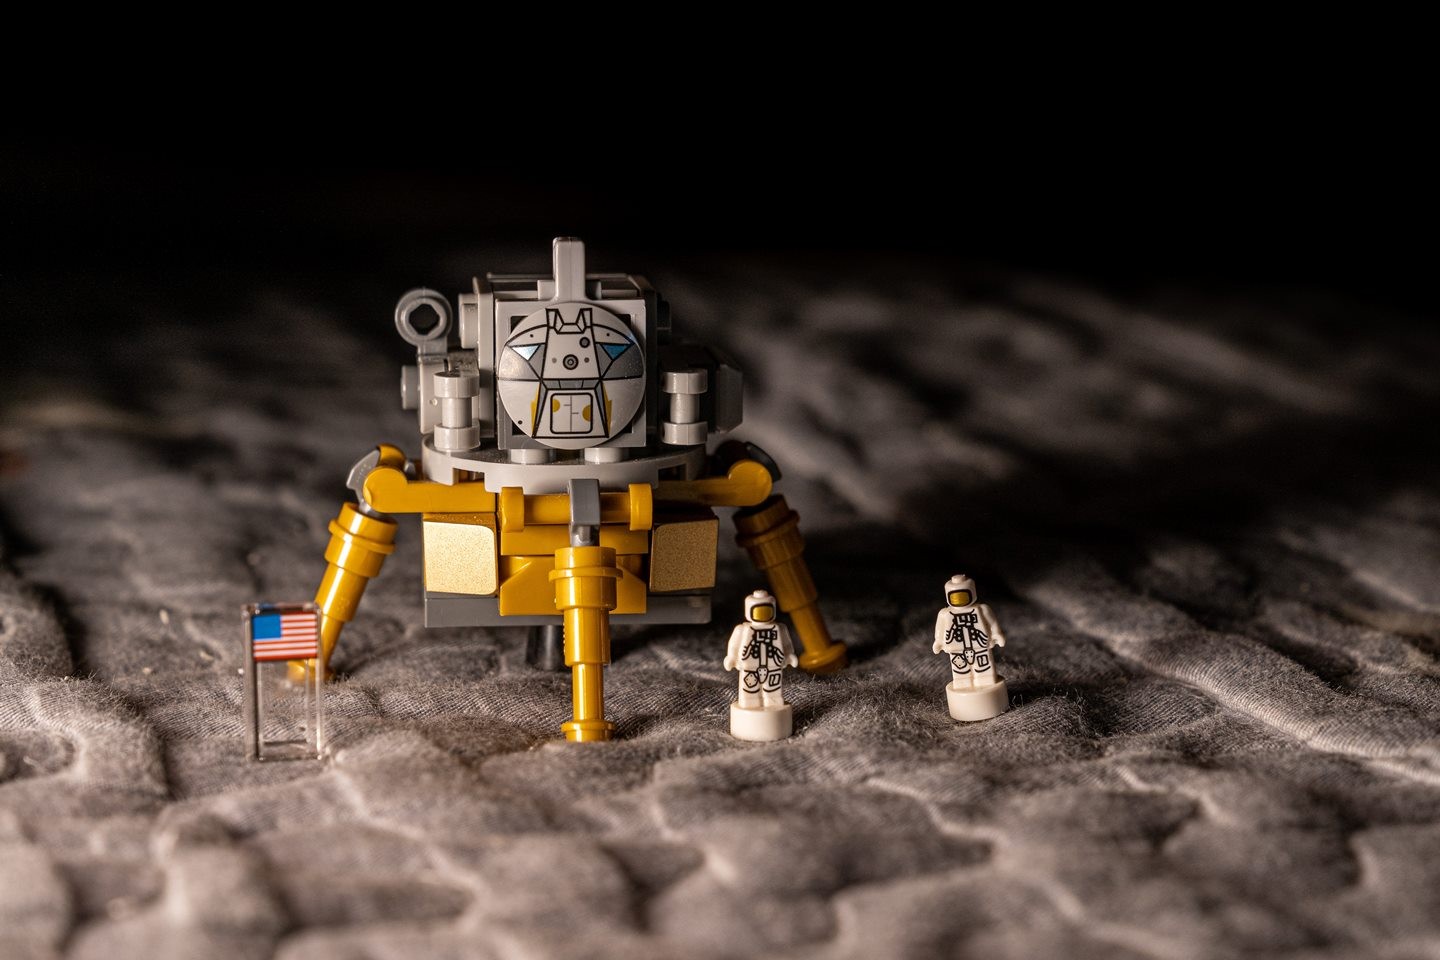 The 50th anniversary of the first moon landing is approaching - Our speakers on the topic of space travel